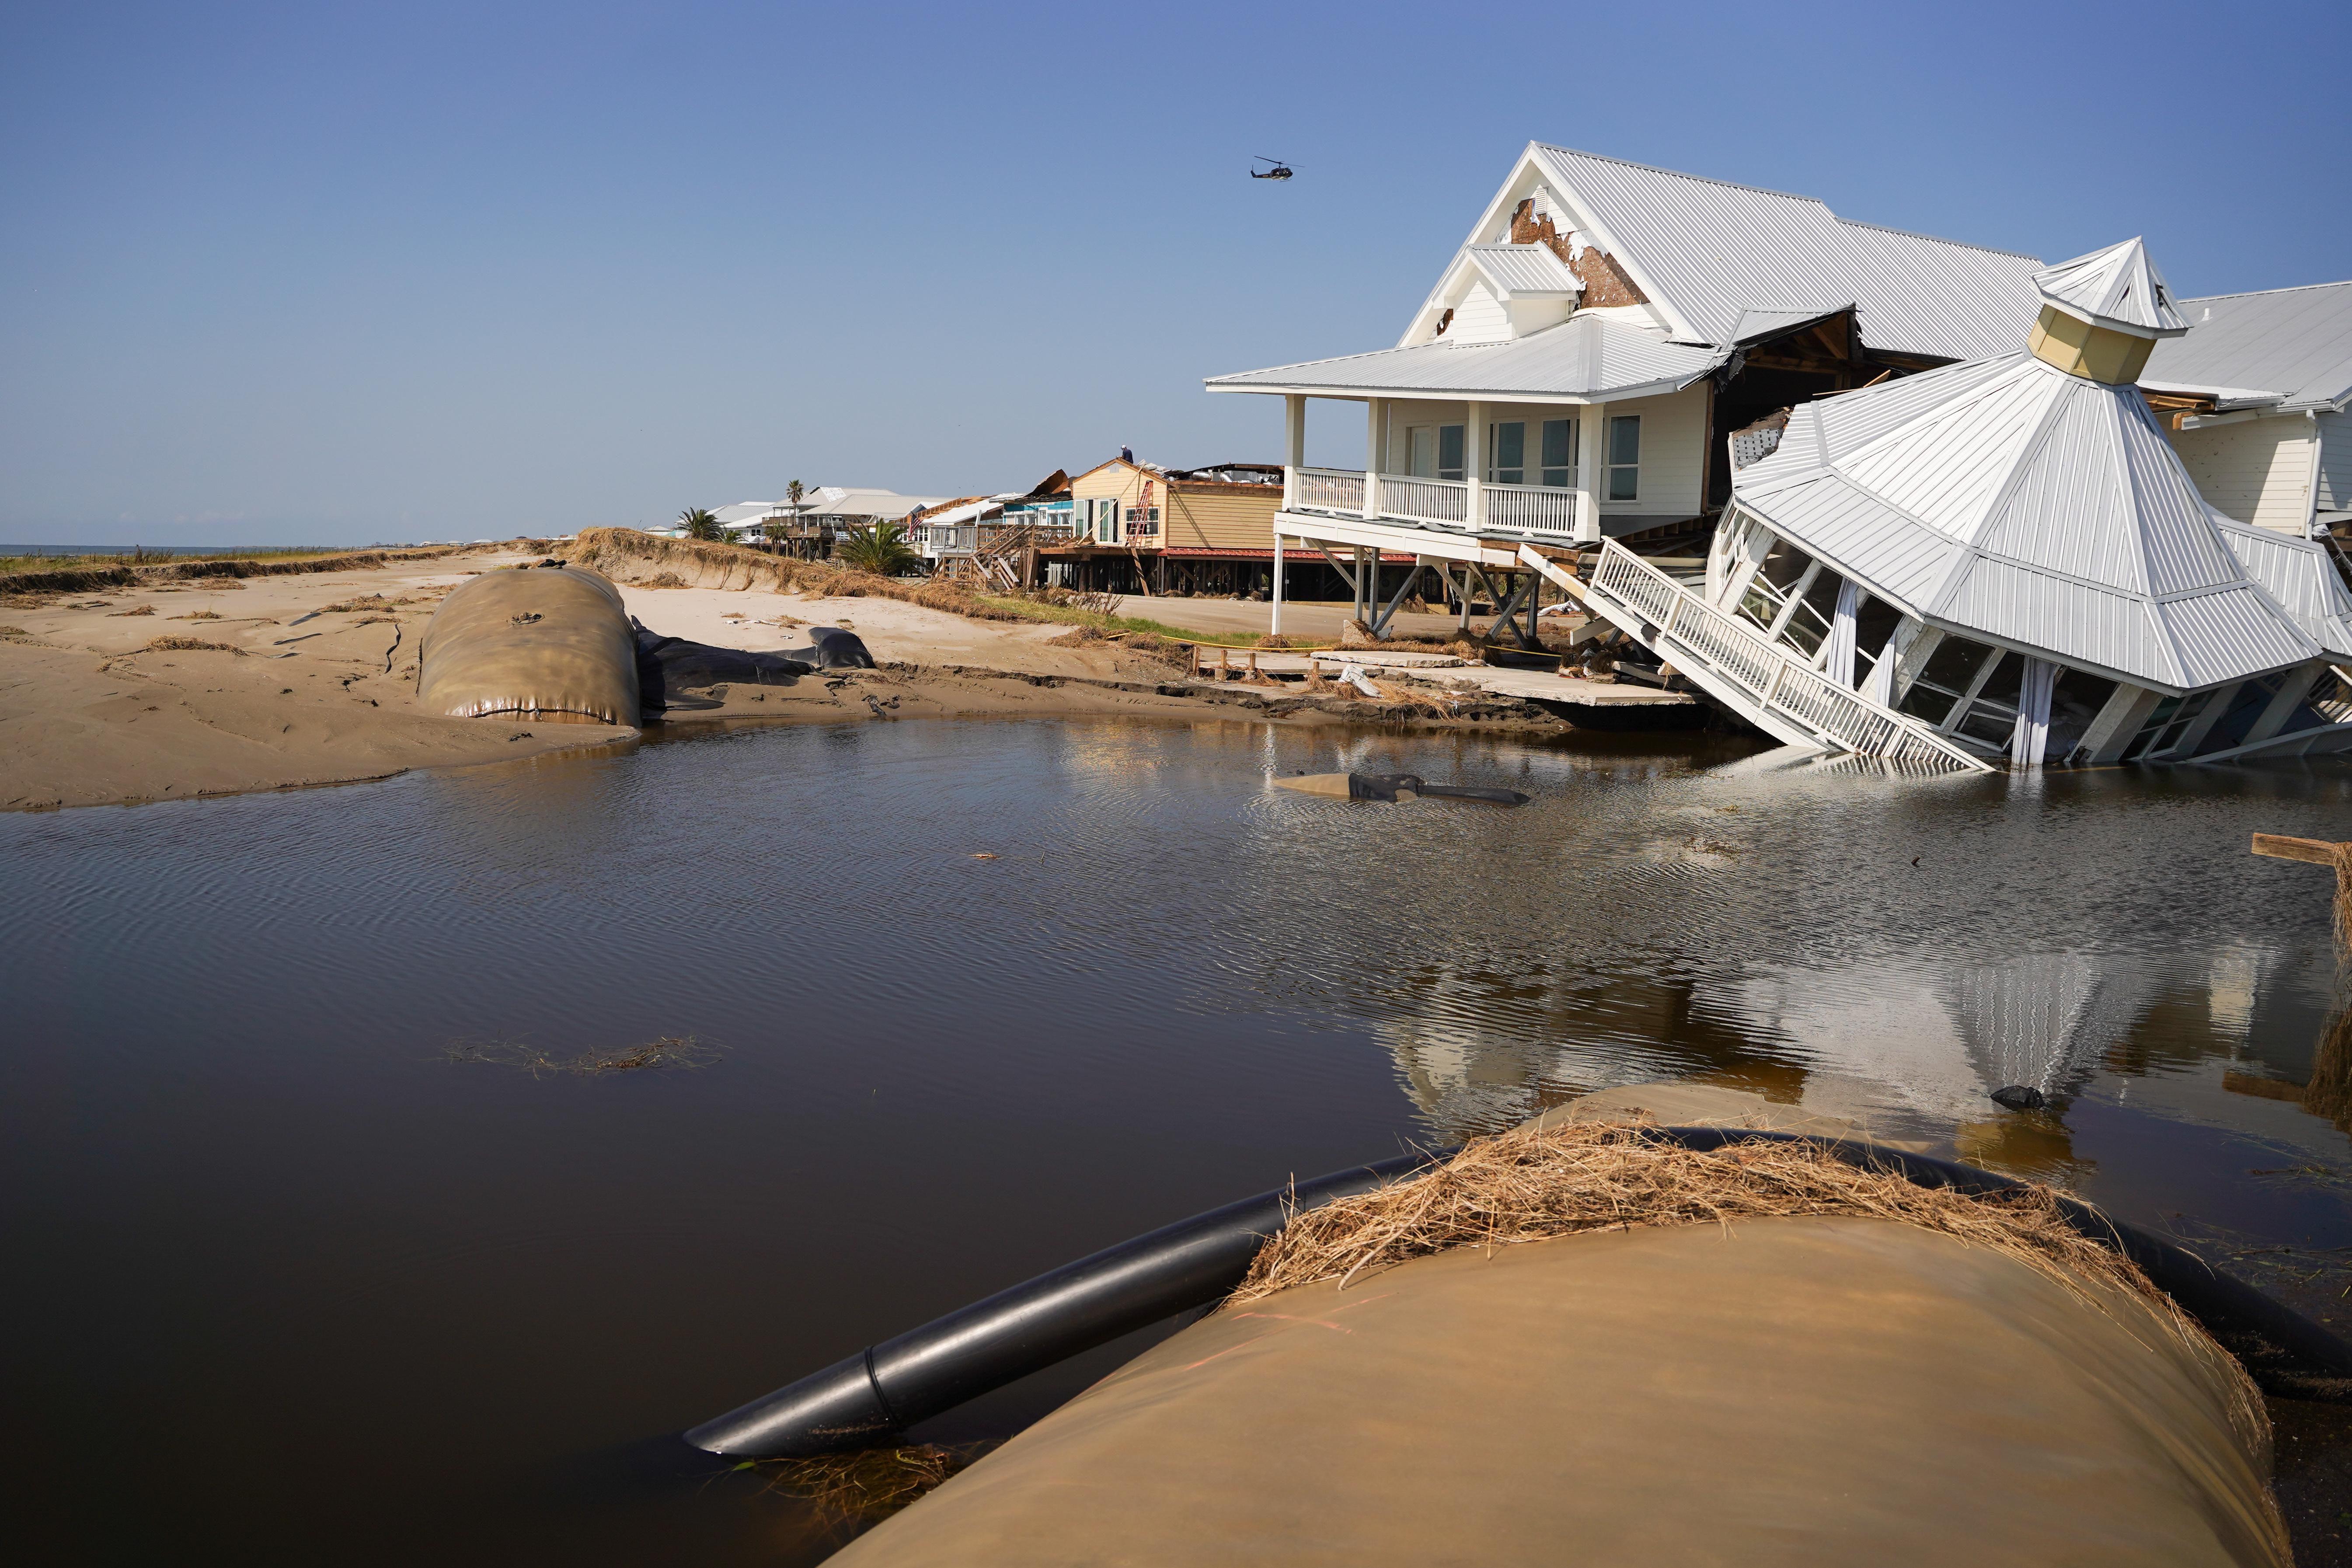 A beachfront house on stilts on a clear day. Half of it has sunk into the rising water.